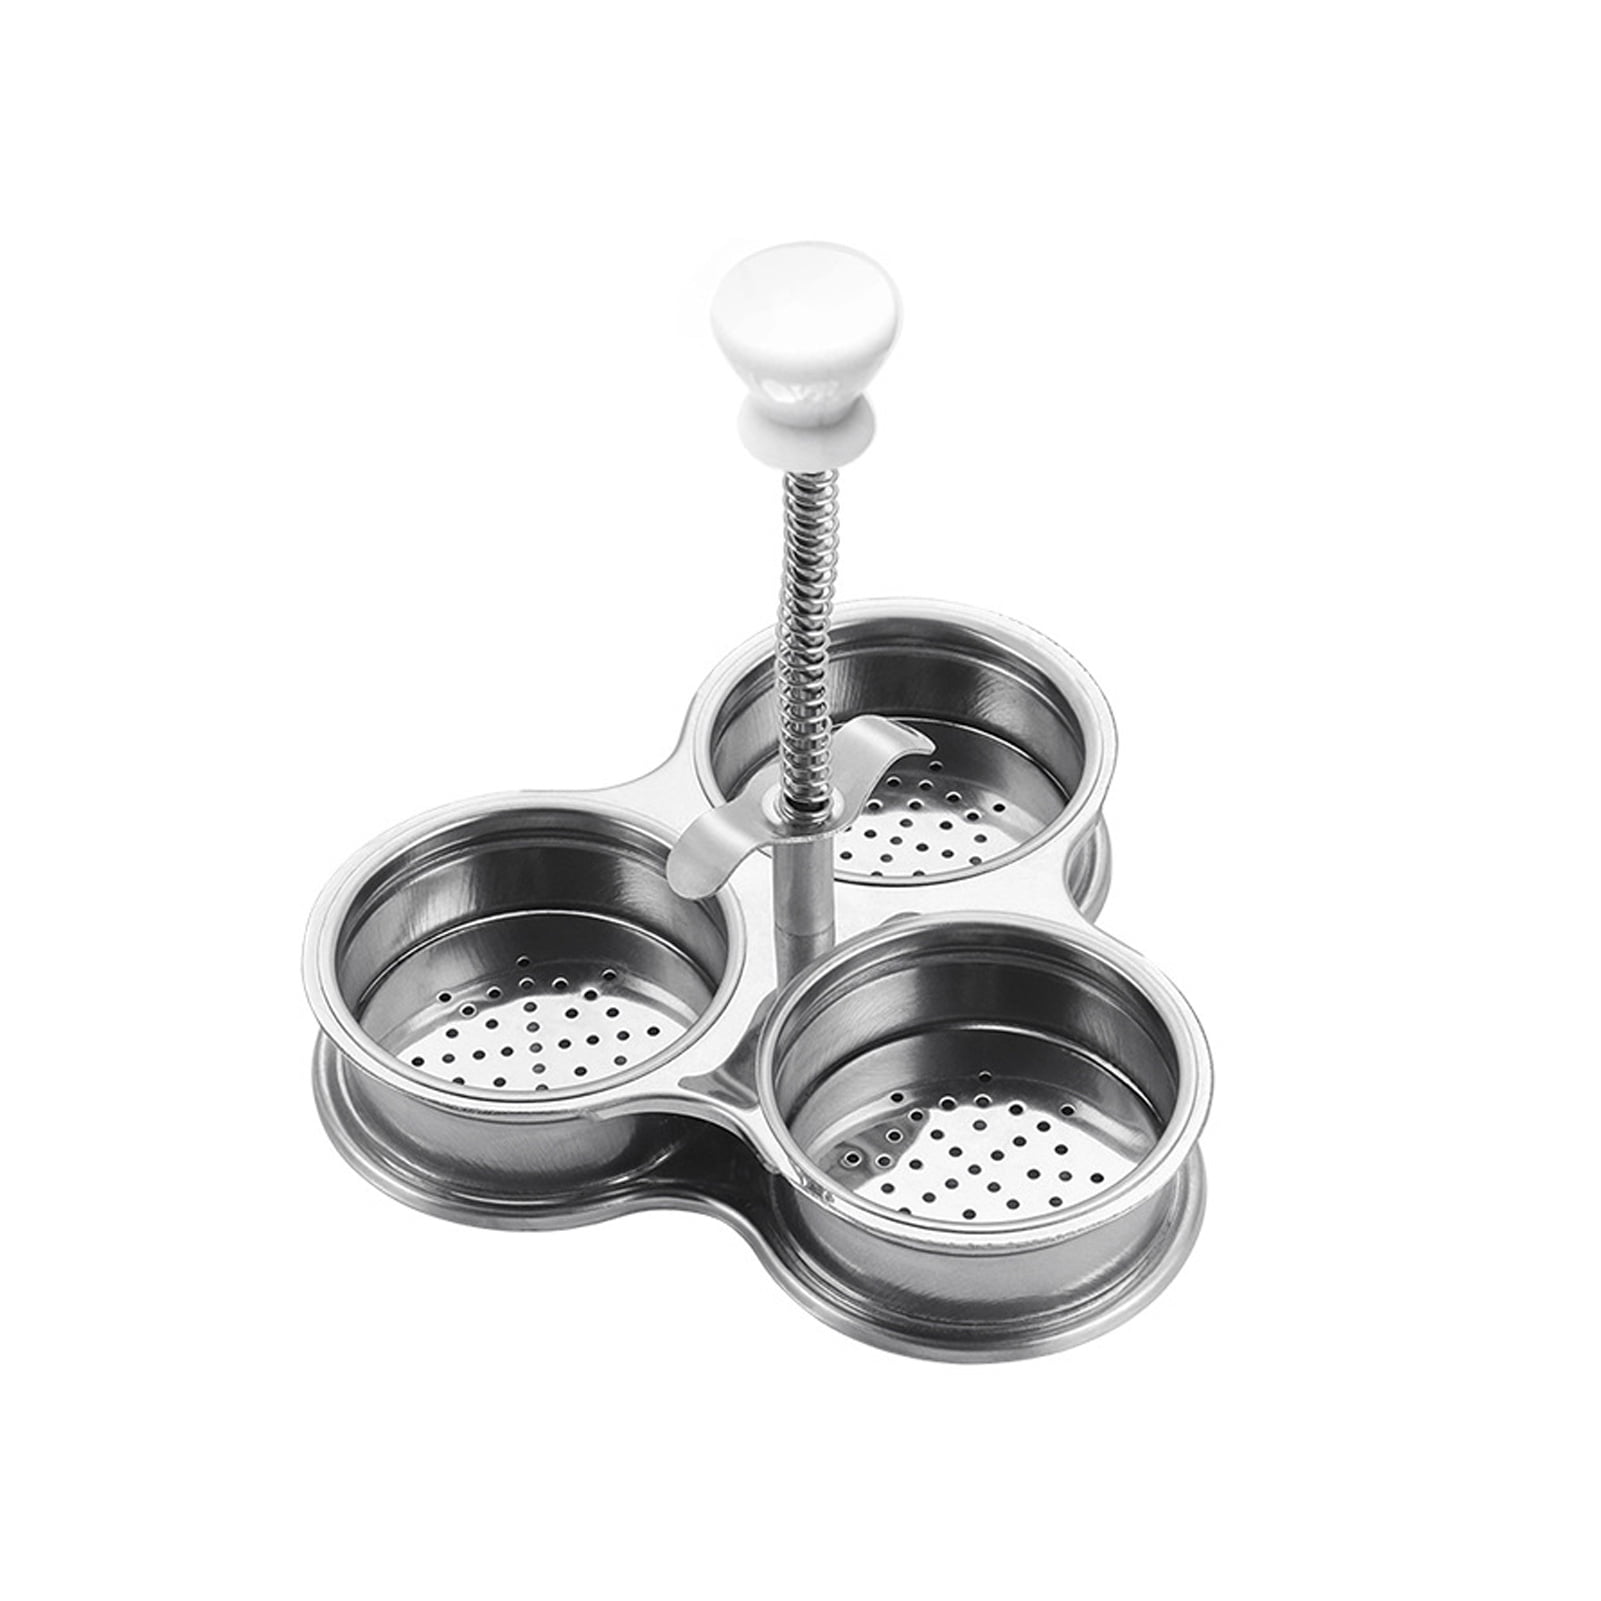 Egg Boiler Cooker Egg Poacher Poached Egg Pan Poached Egg Cups Stainless Steel Non-Stick for Steaming Eggs and Boiling Eggs